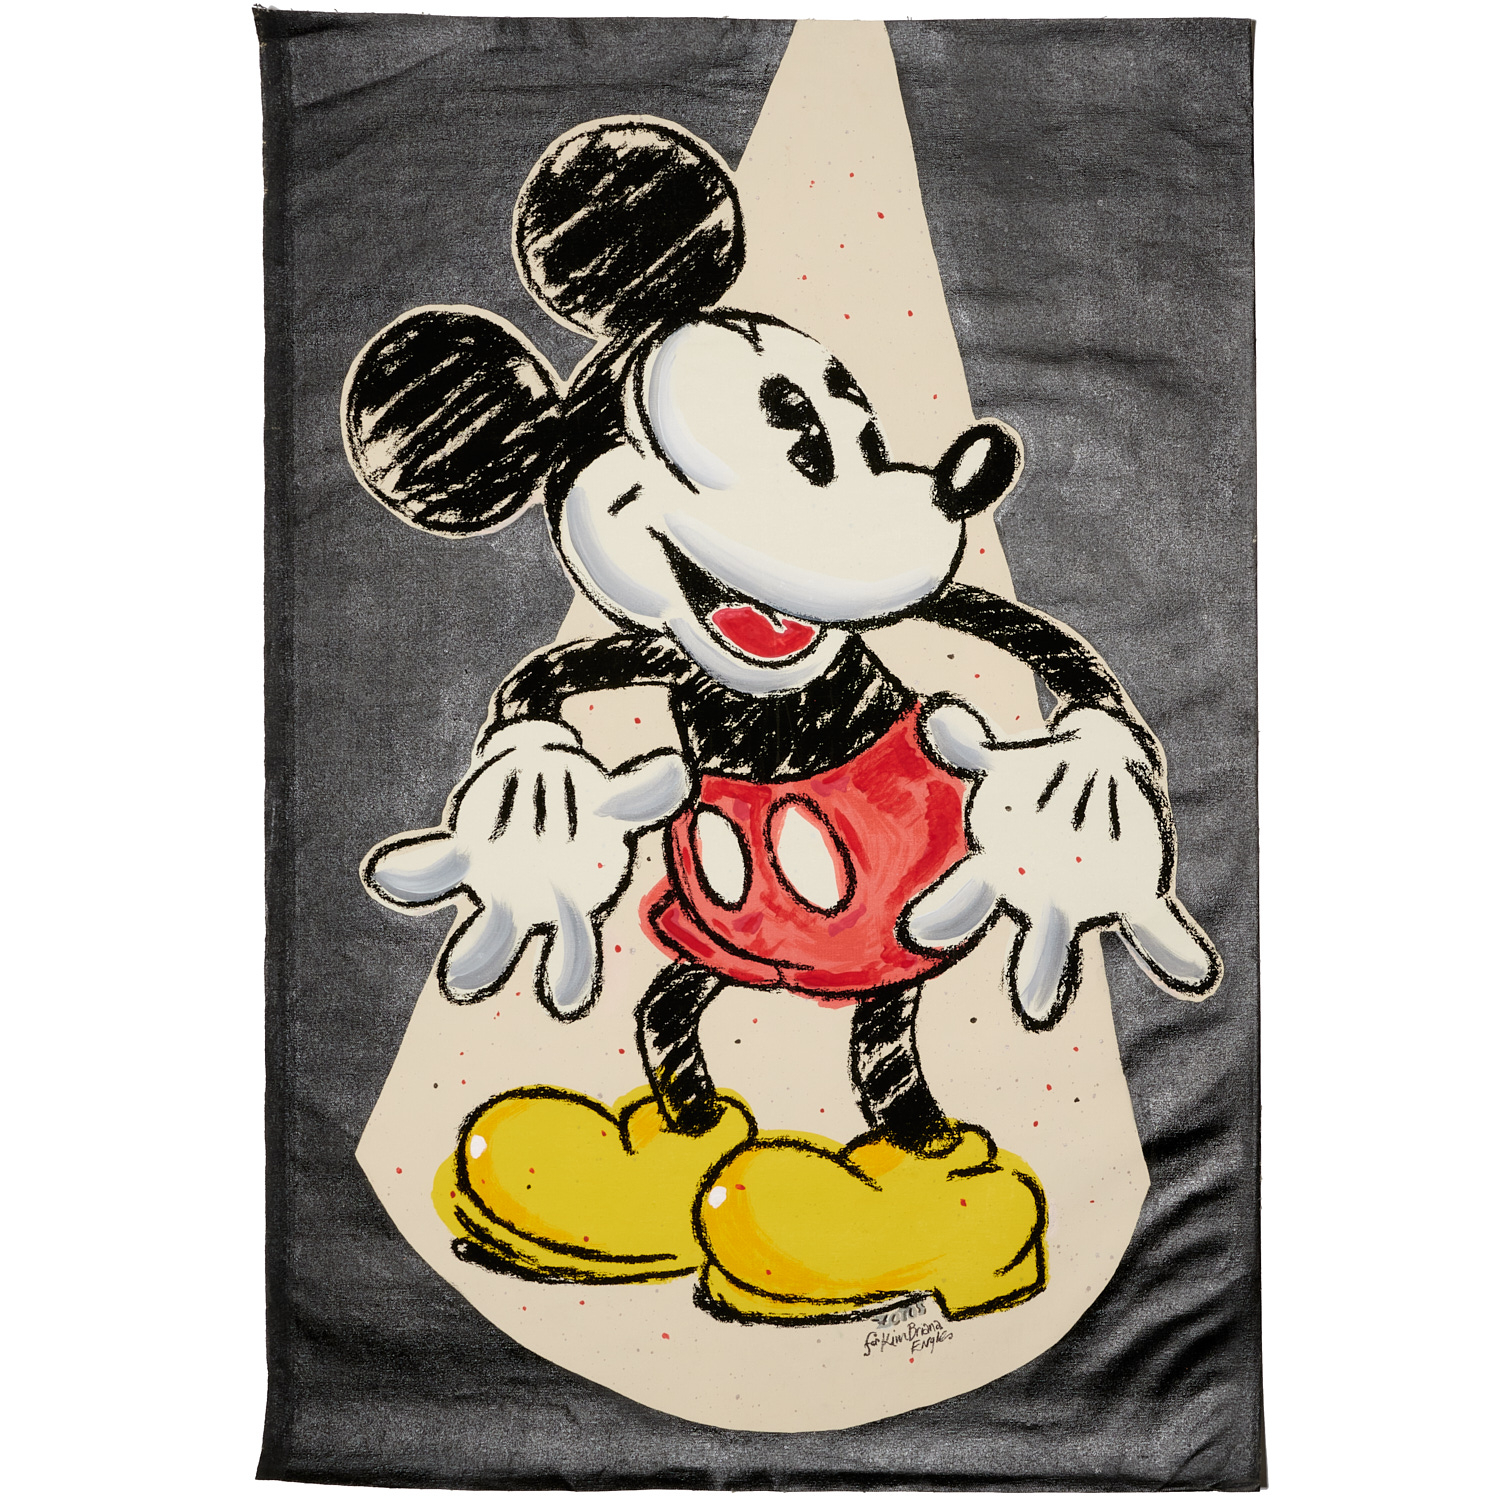 TOM ZOTOS MICKEY MOUSE PAINTING 361ffc